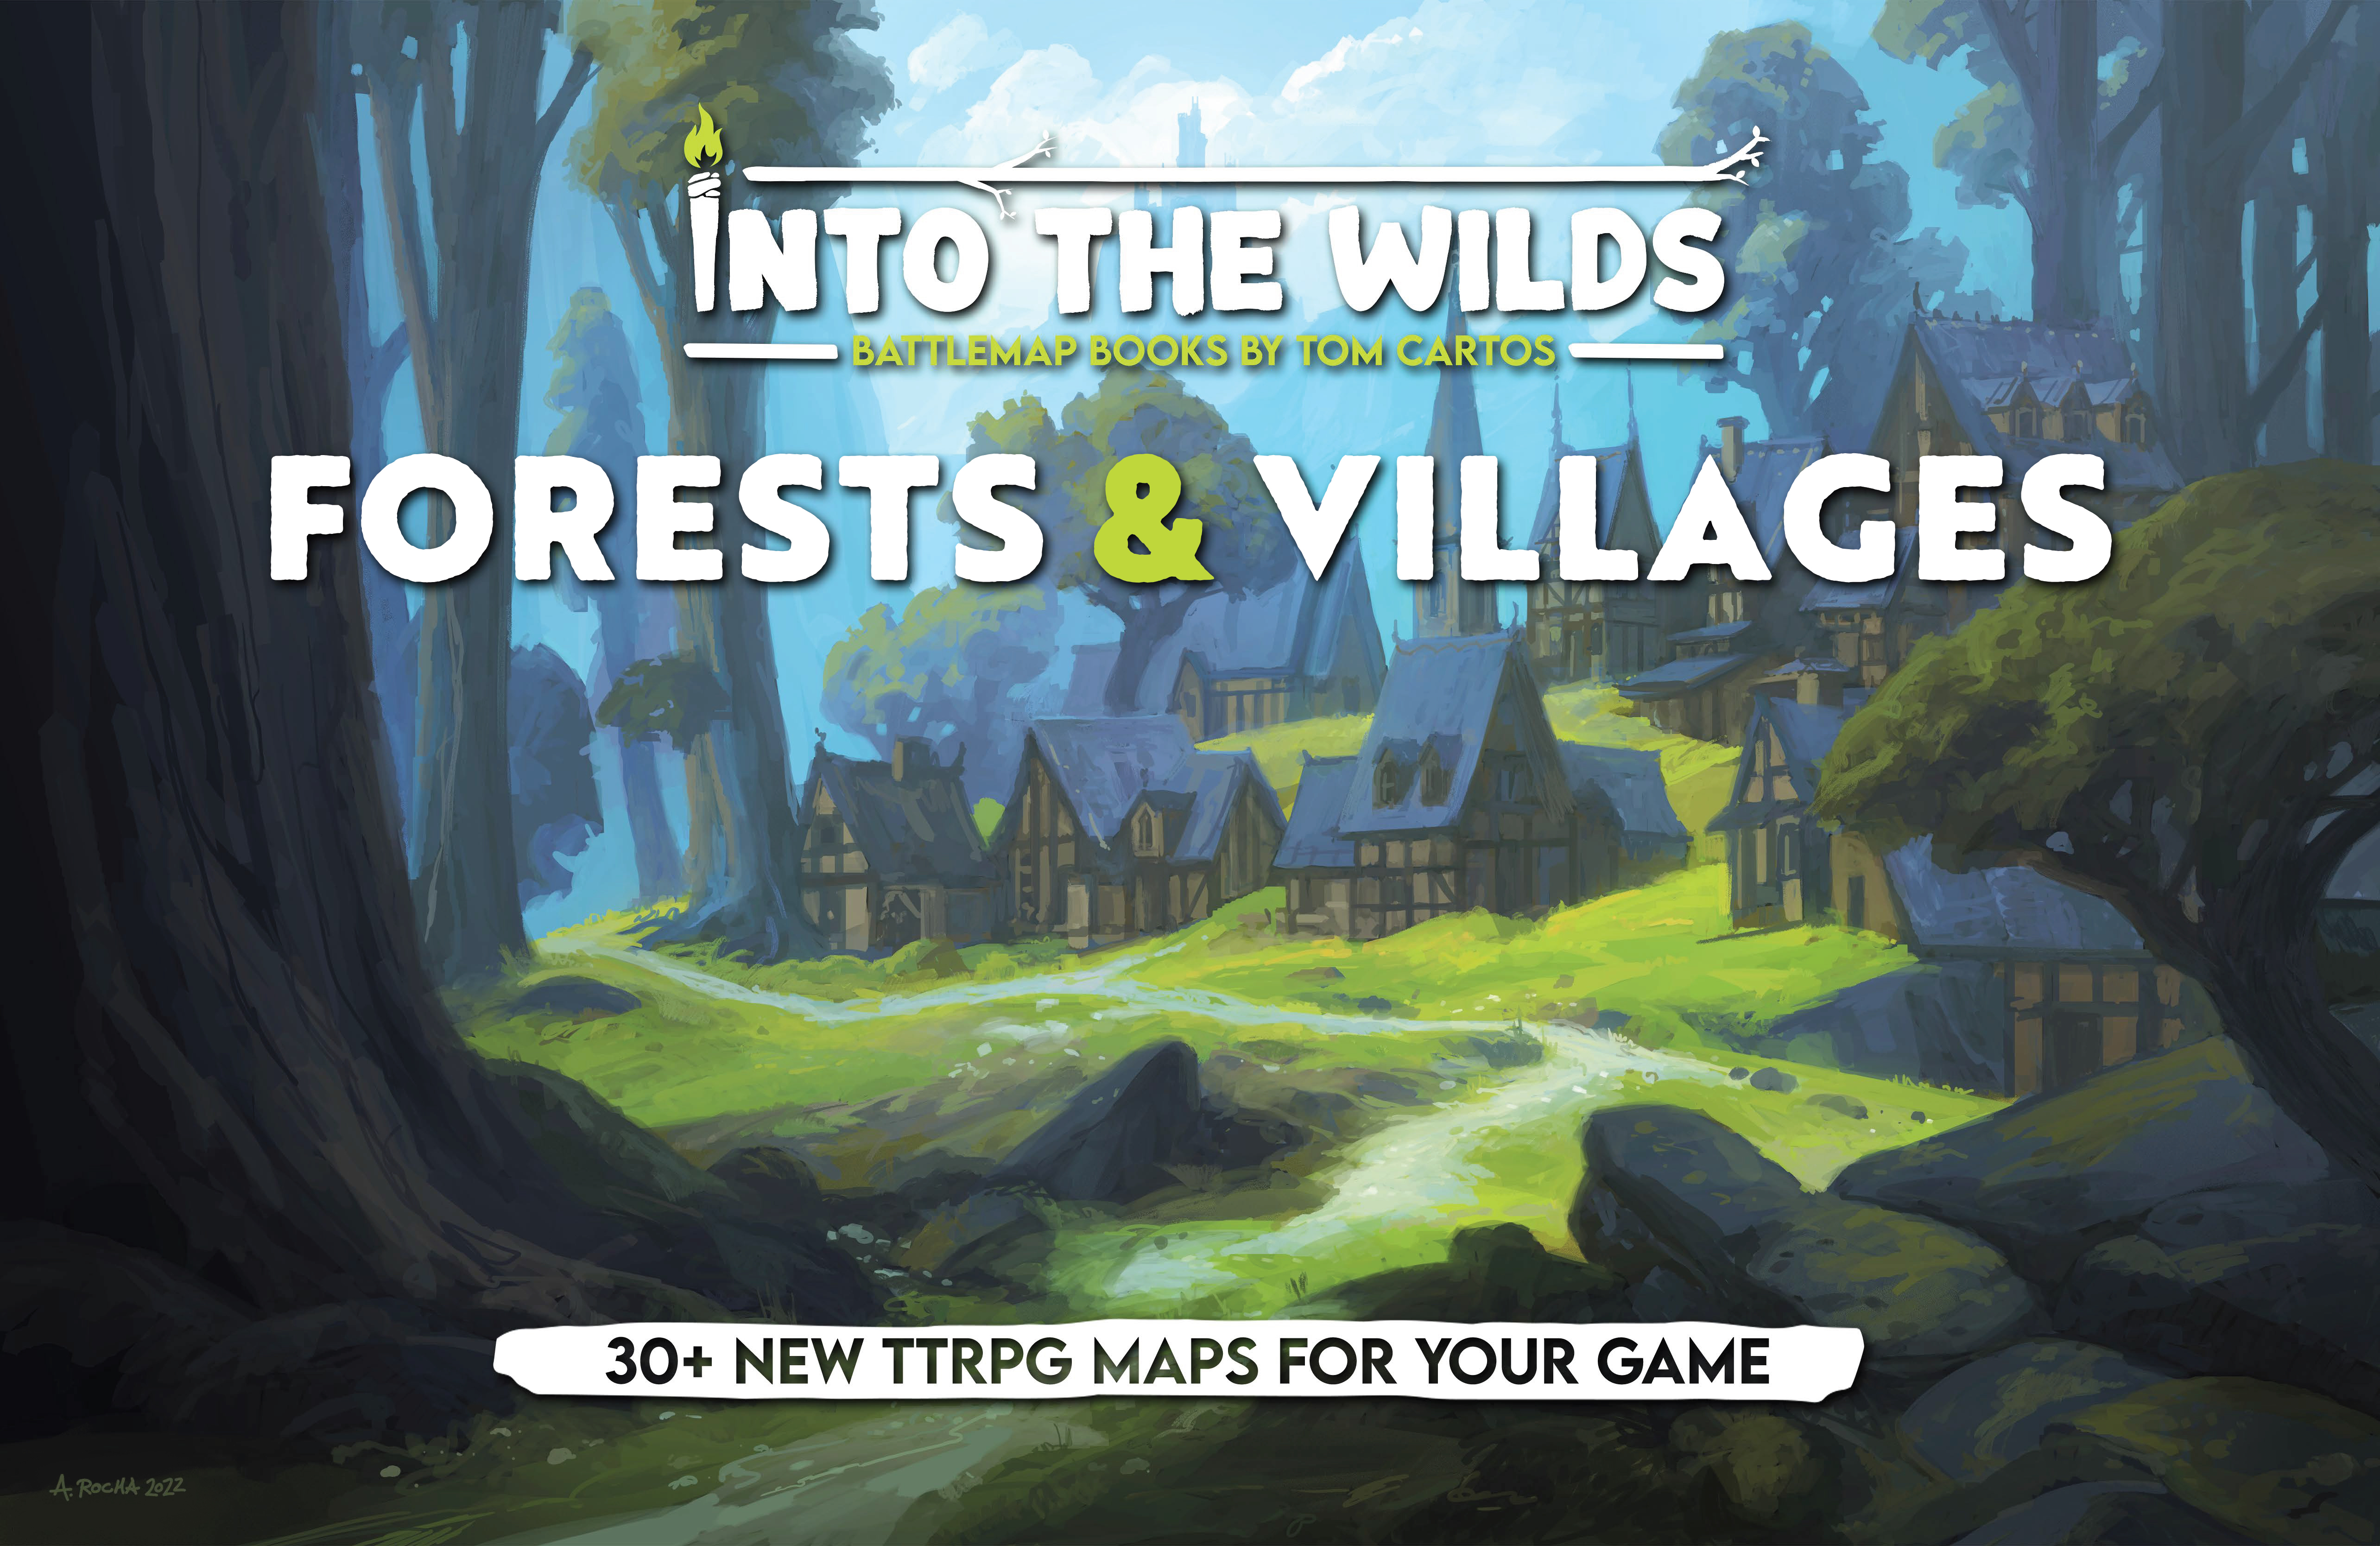 Into the Wilds Battlemap Books: Forest and Villages 